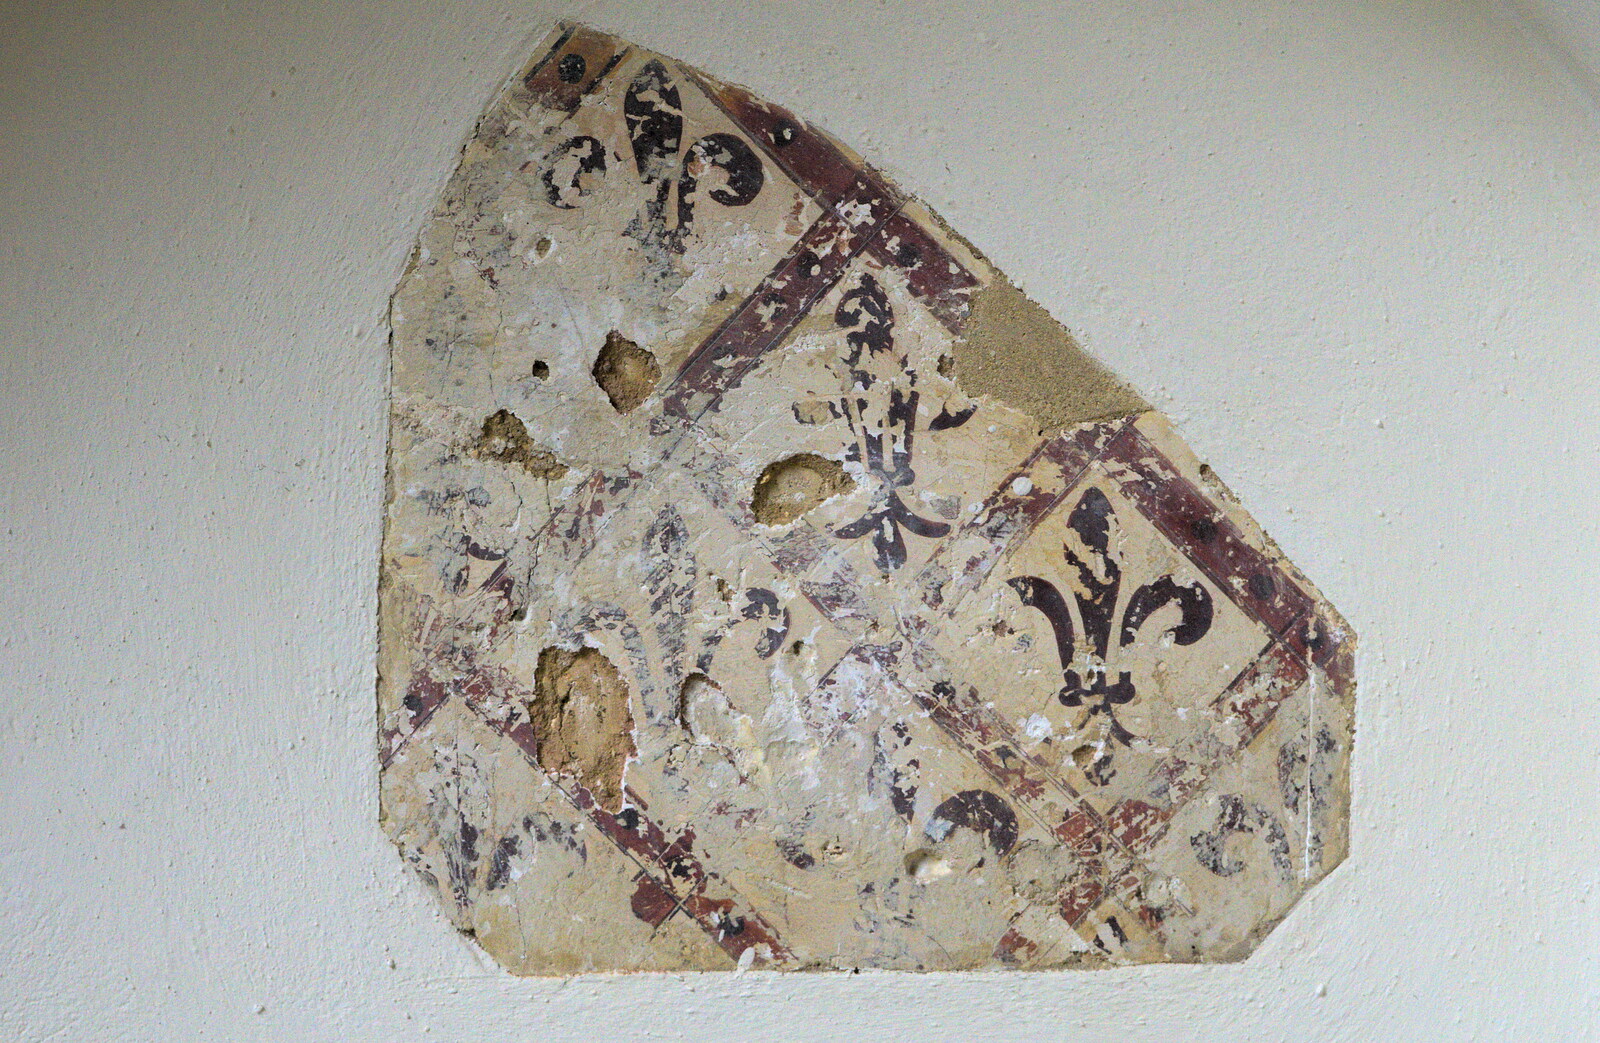 A fragment of some wall painting from A Weekend in the Camper Van, West Harling, Norfolk - 21st June 2014